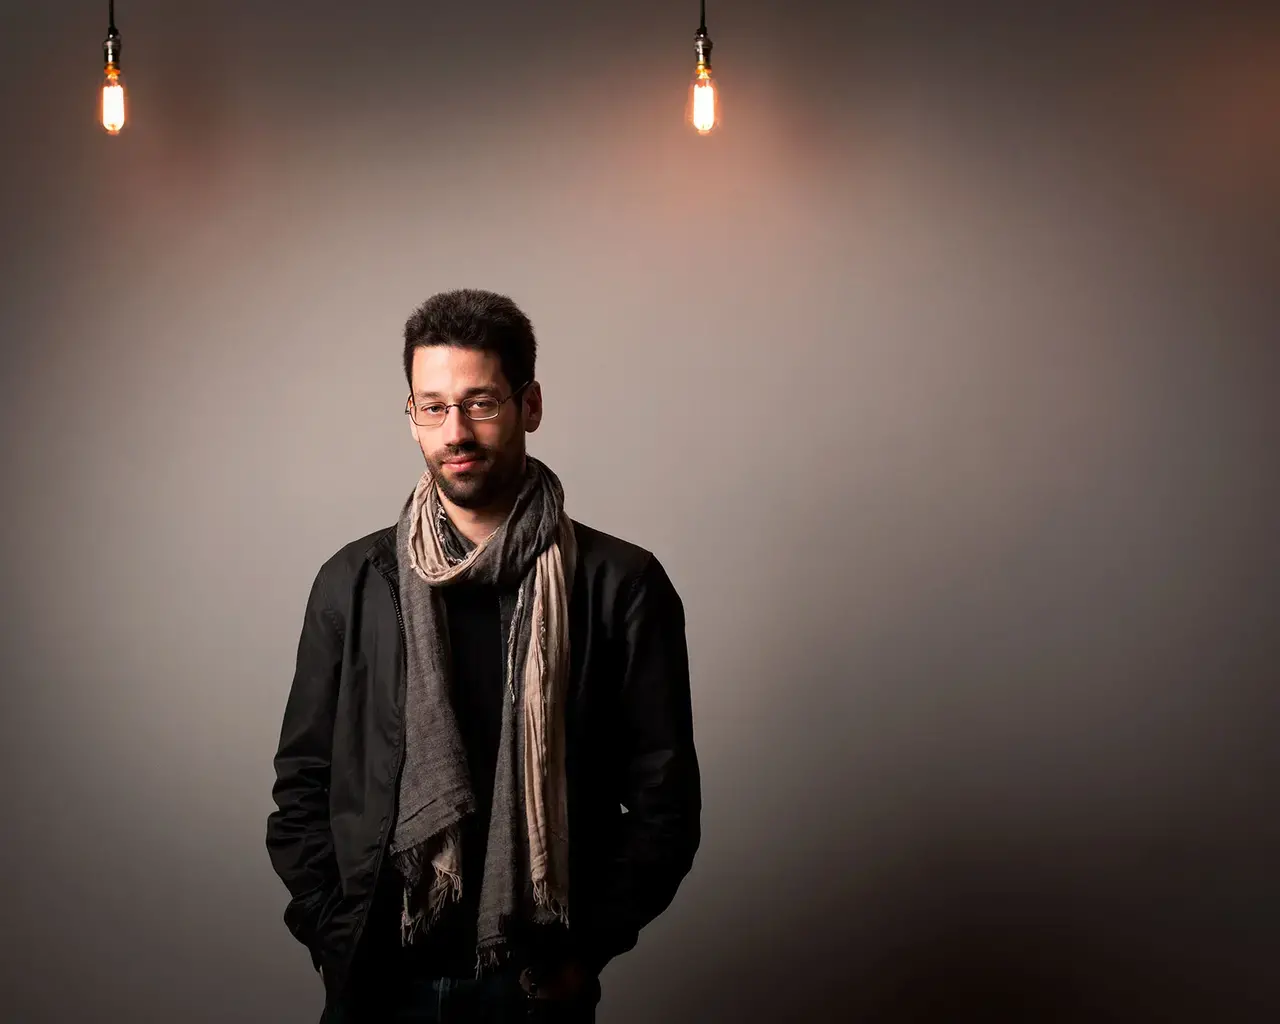 World-renowned pianist Jonathan Biss extends his deep musical and intellectual curiosity from the keyboard to classical music lovers in the concert hall and beyond. For this project, he will serve not only as pianist in three high-profile performances, but also as co-curator and the author of a Kindle Single.